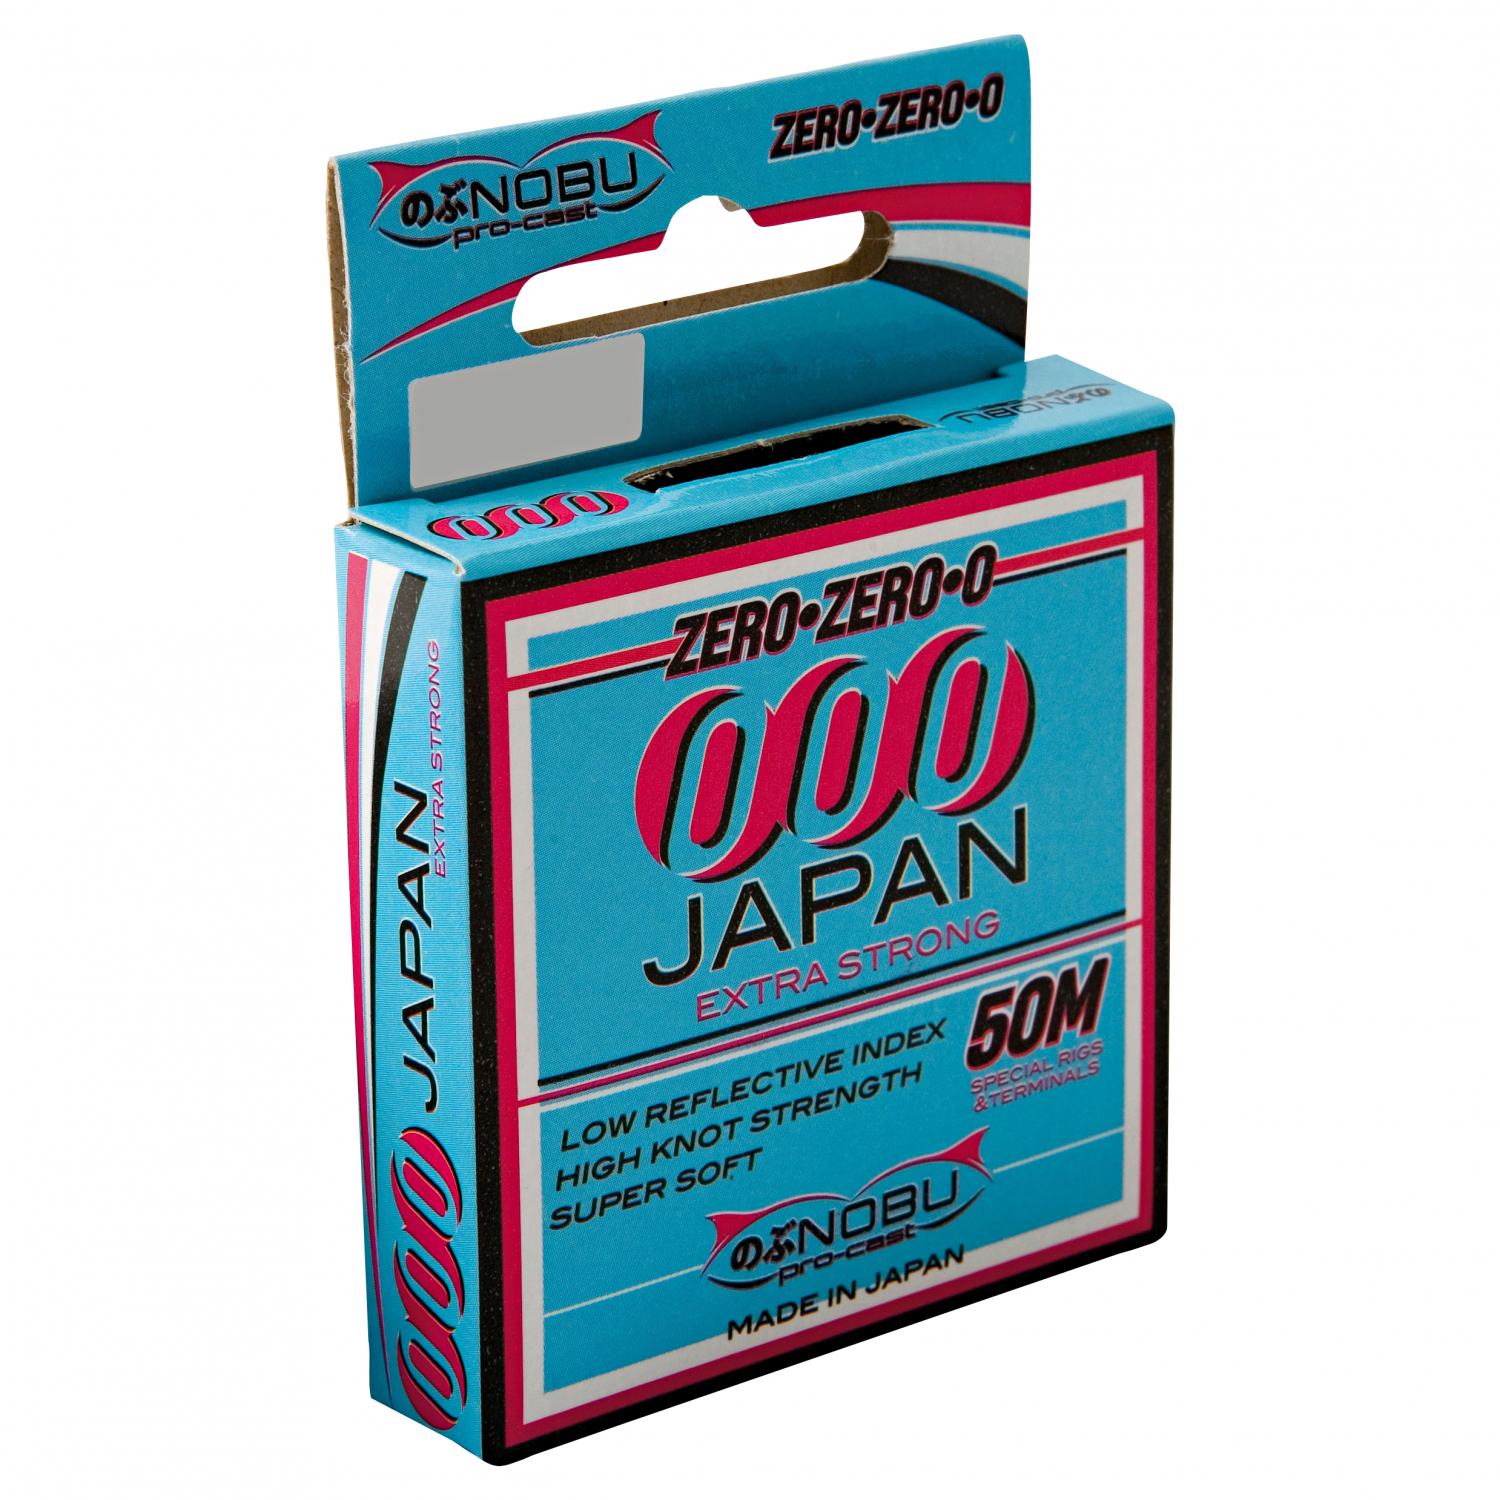 Lineaeffe Fishing line 000 Japan Extra Strong 